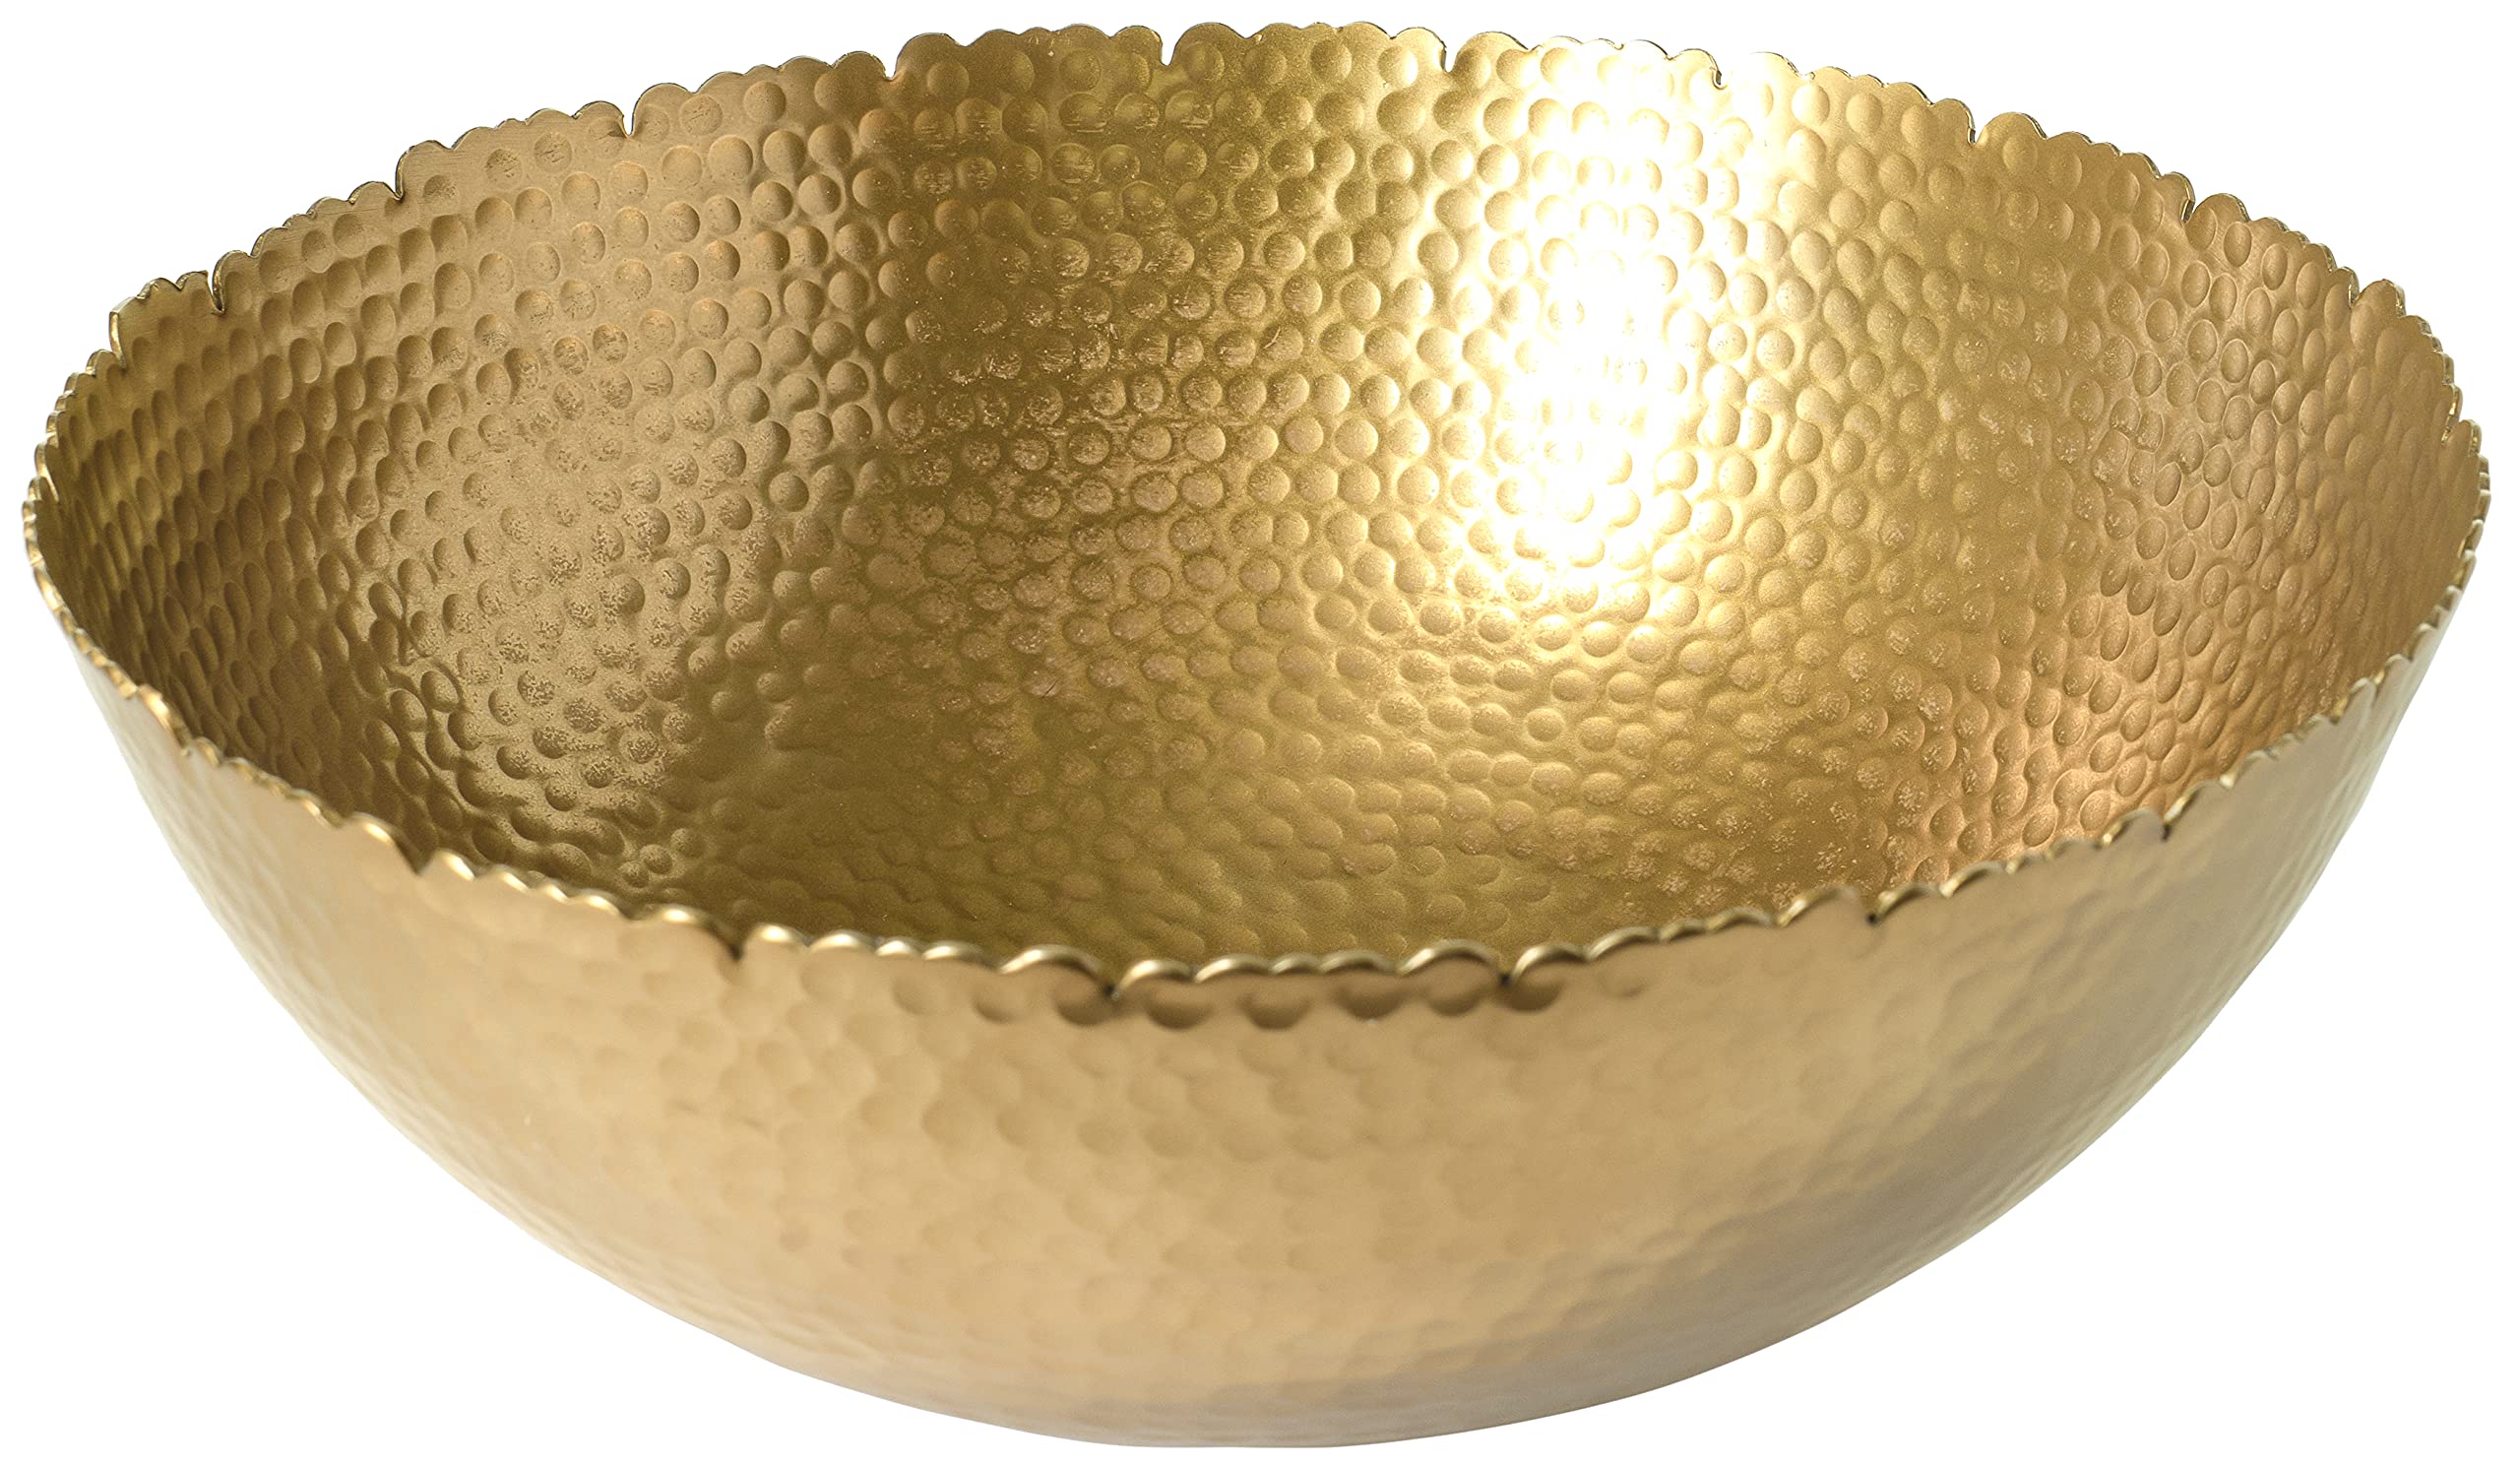 Red Co. Antique Style Tabletop Gold Textured Centerpiece Round Serving Platter Tray Catch-All Dish - 13 Inches Dia, for Dining Living Room Home Décor